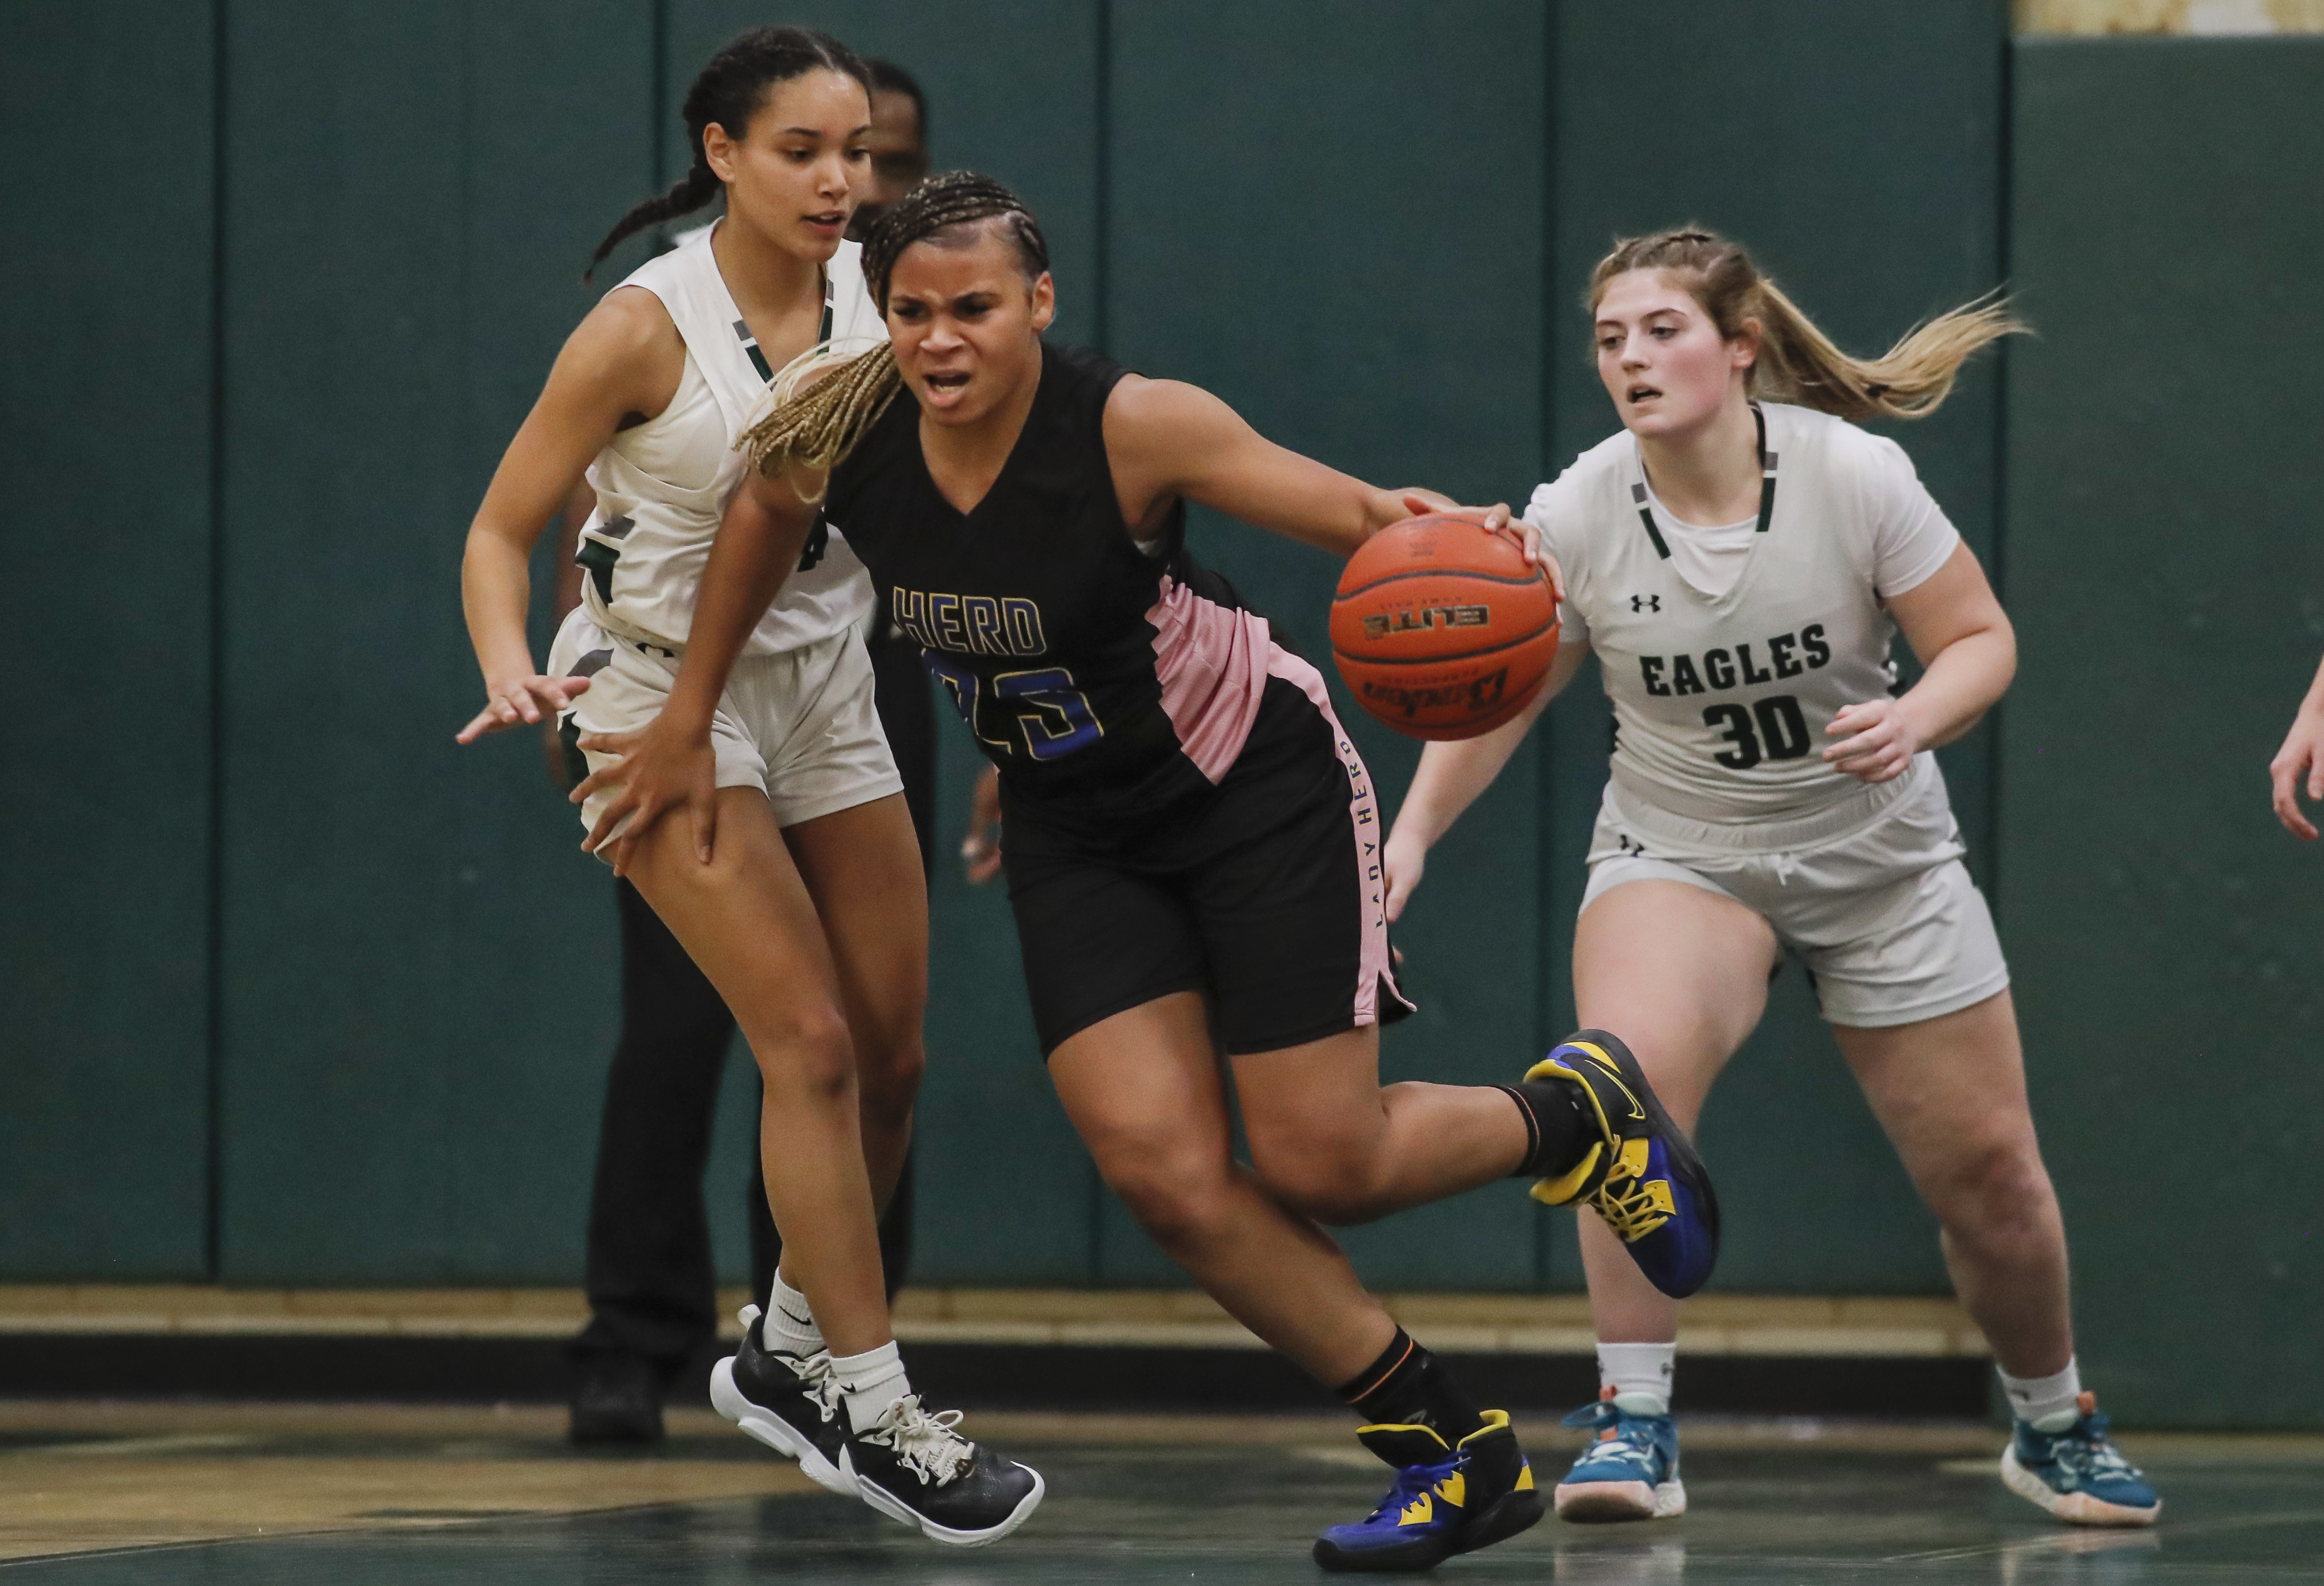 Girls Basketball: Westwood beats River Dell, 49-32